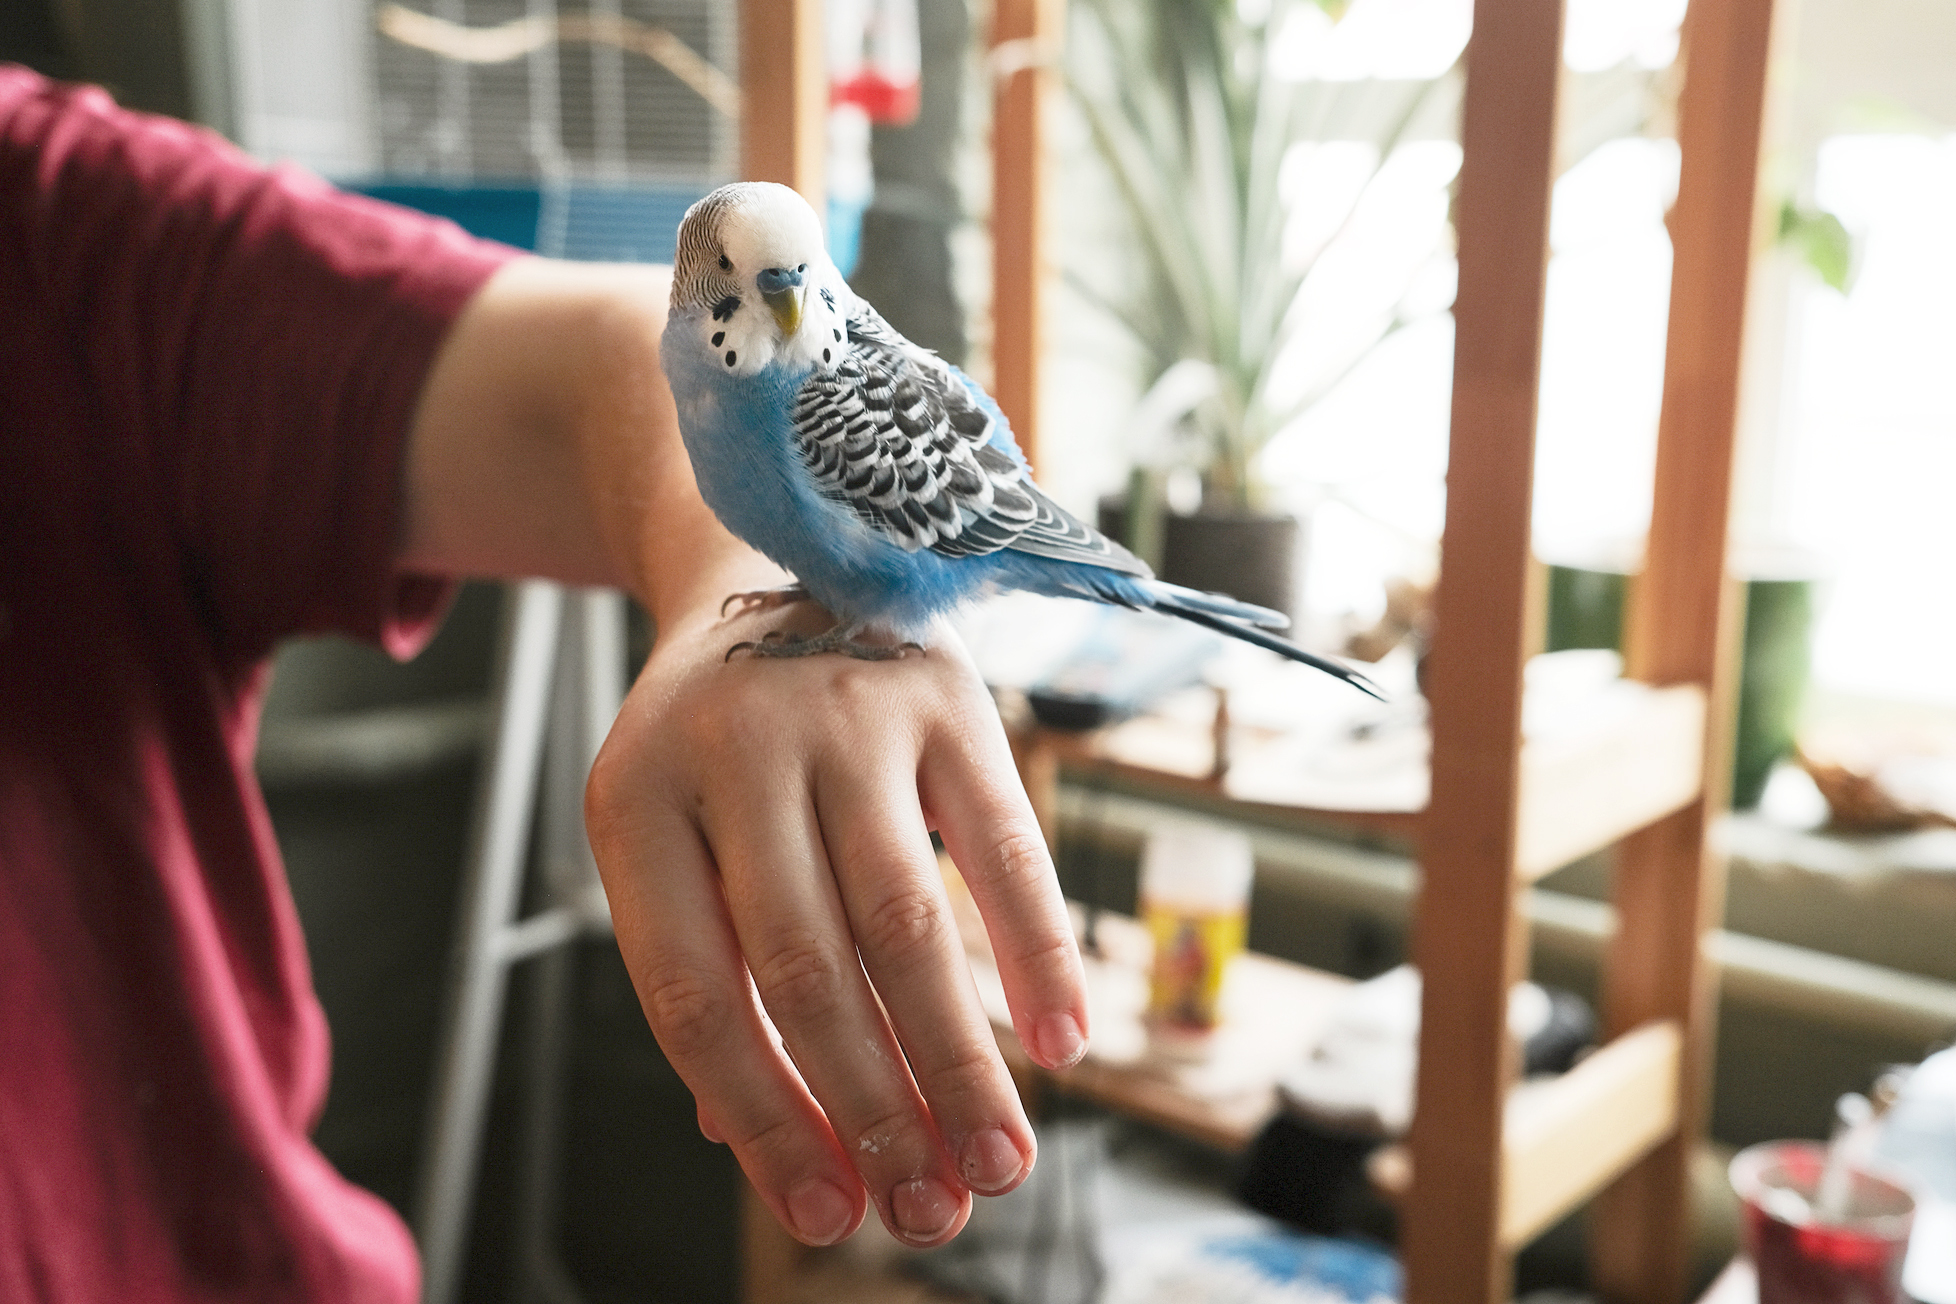 Why Birds Make Great Pets?